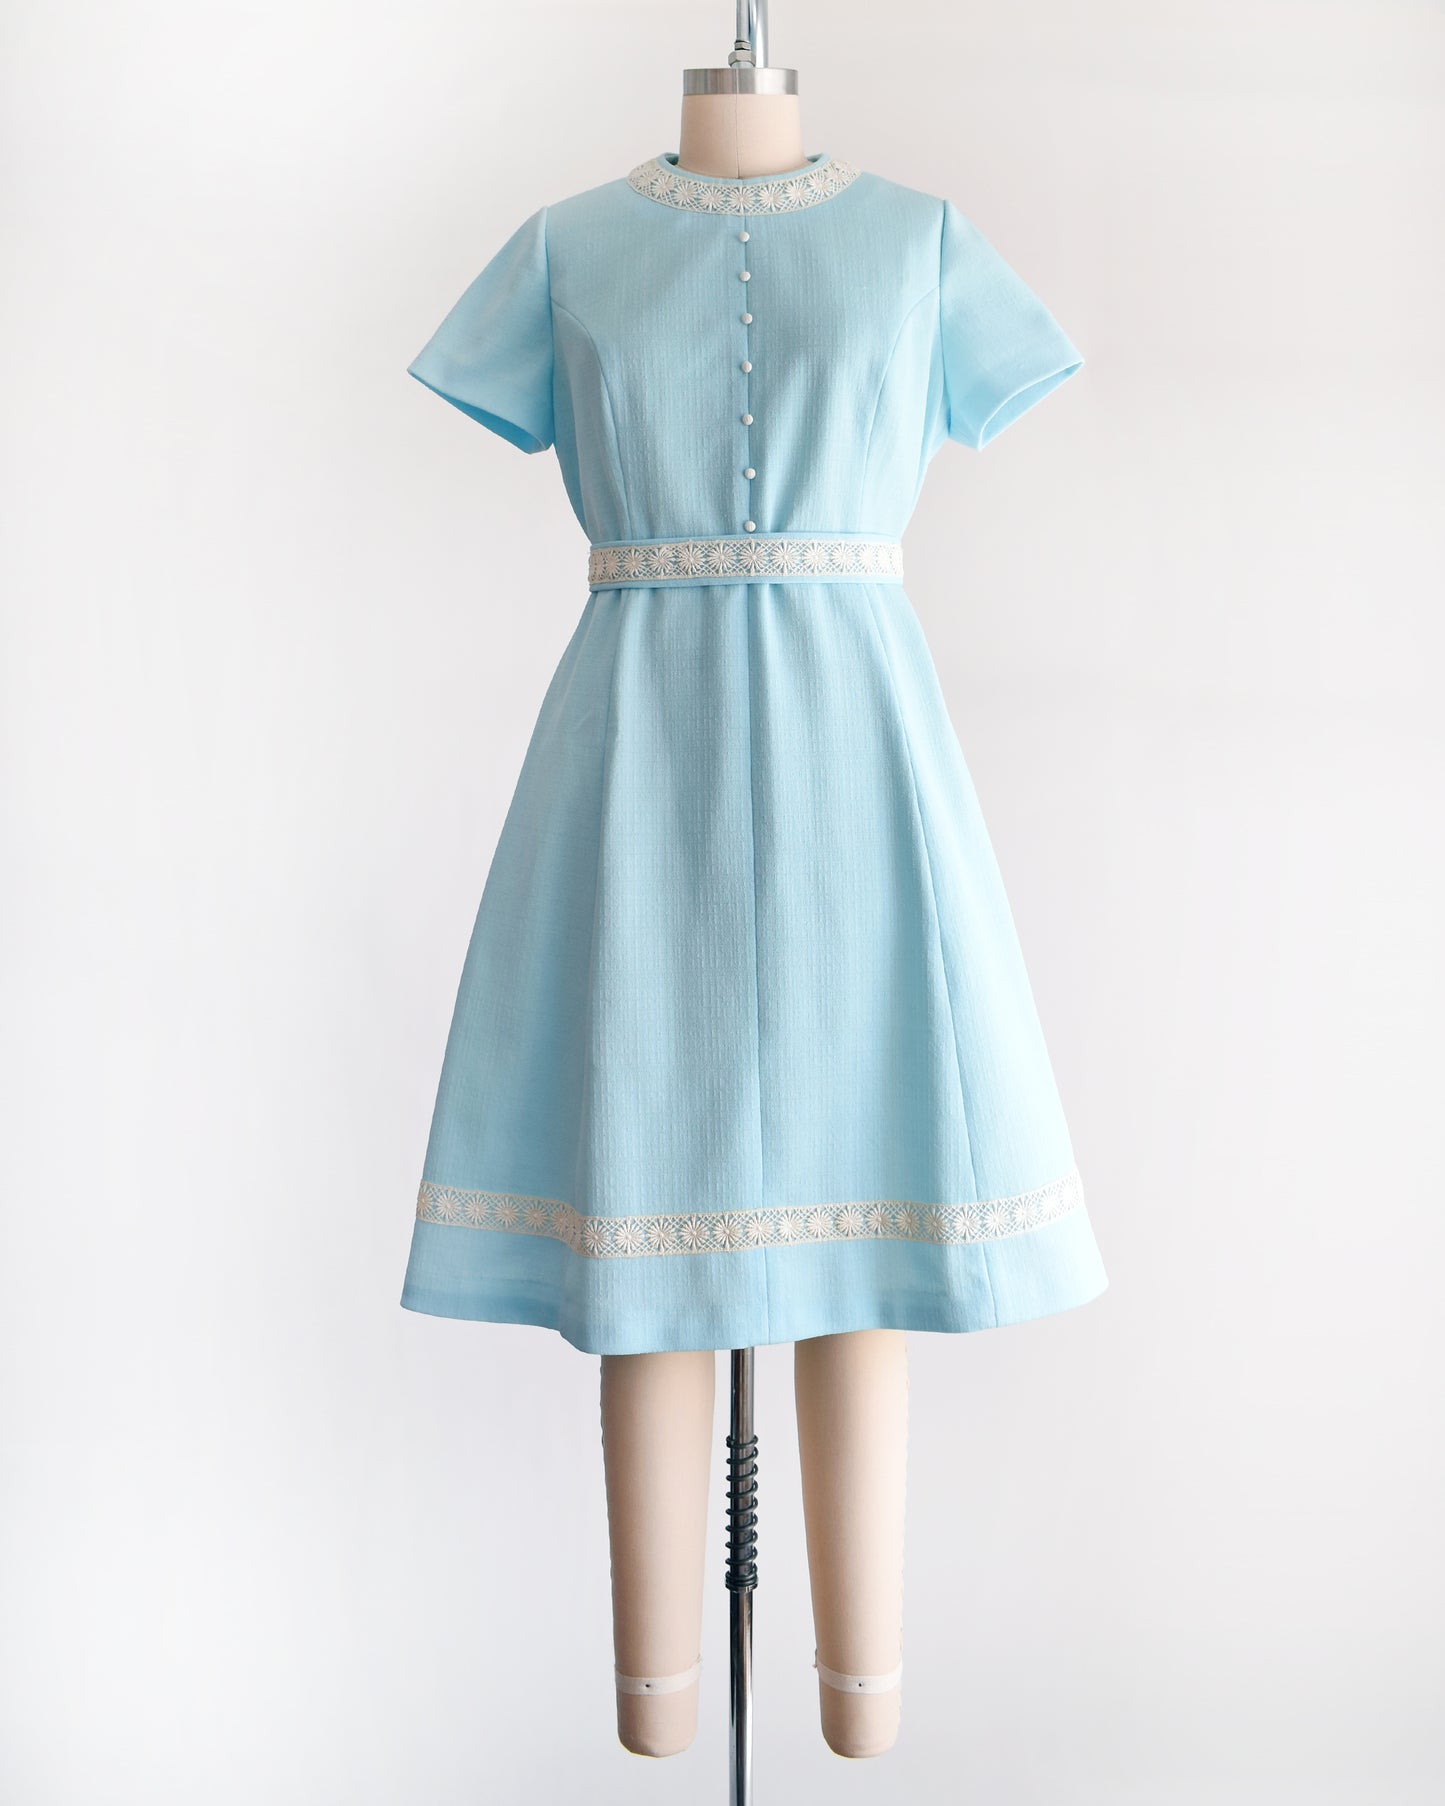 a late 1960s early 1970s vintage mod dress that is light blue and has cream floral lace trim around the collar, belt, and hem